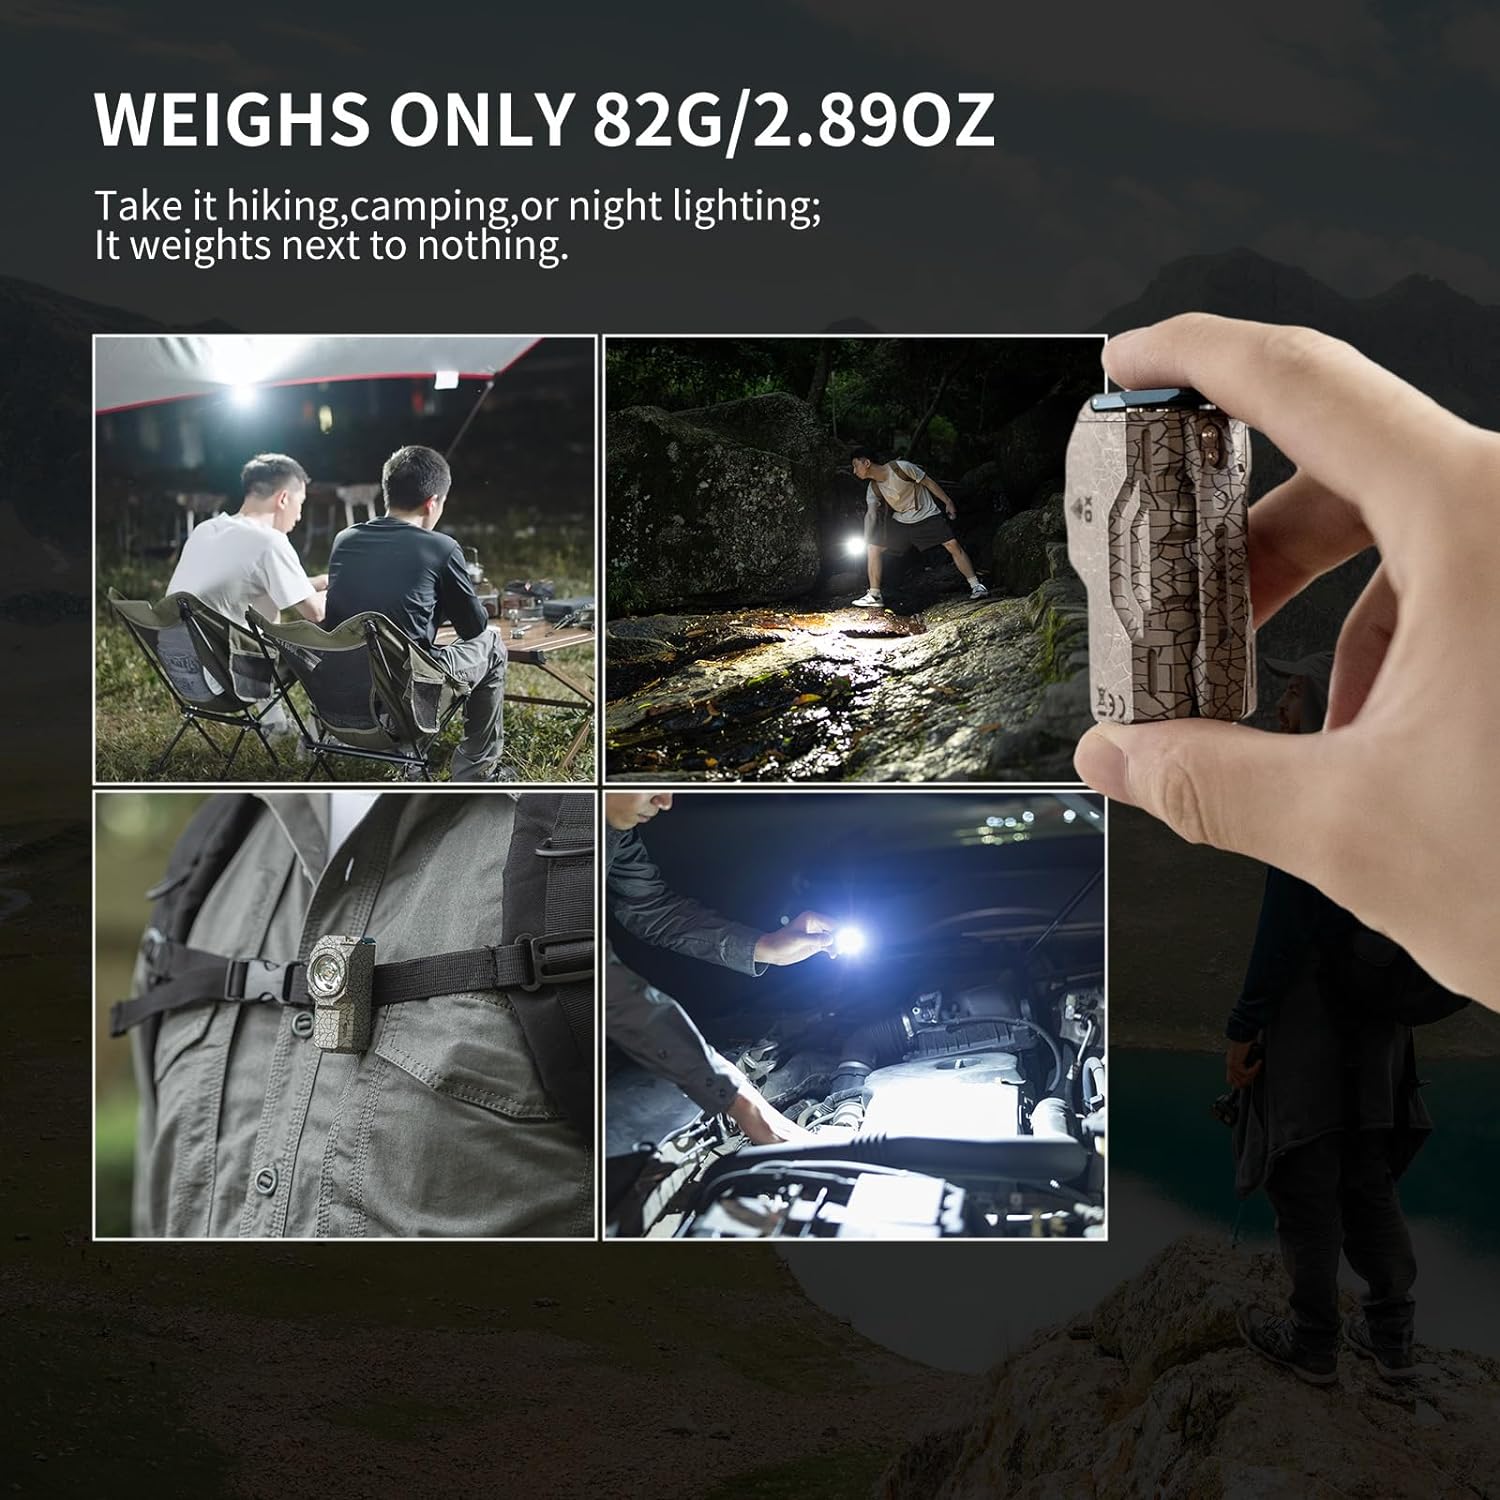 WUBEN X0 Rechargeable Mini Flashlight with Clip, 900 High Lumens Small Pocket LED Flashlights, 175° Floodlight Right Angle Magnetic Flashlight, Super Bright 7 Modes for Hiking, Camping, Everyday Use